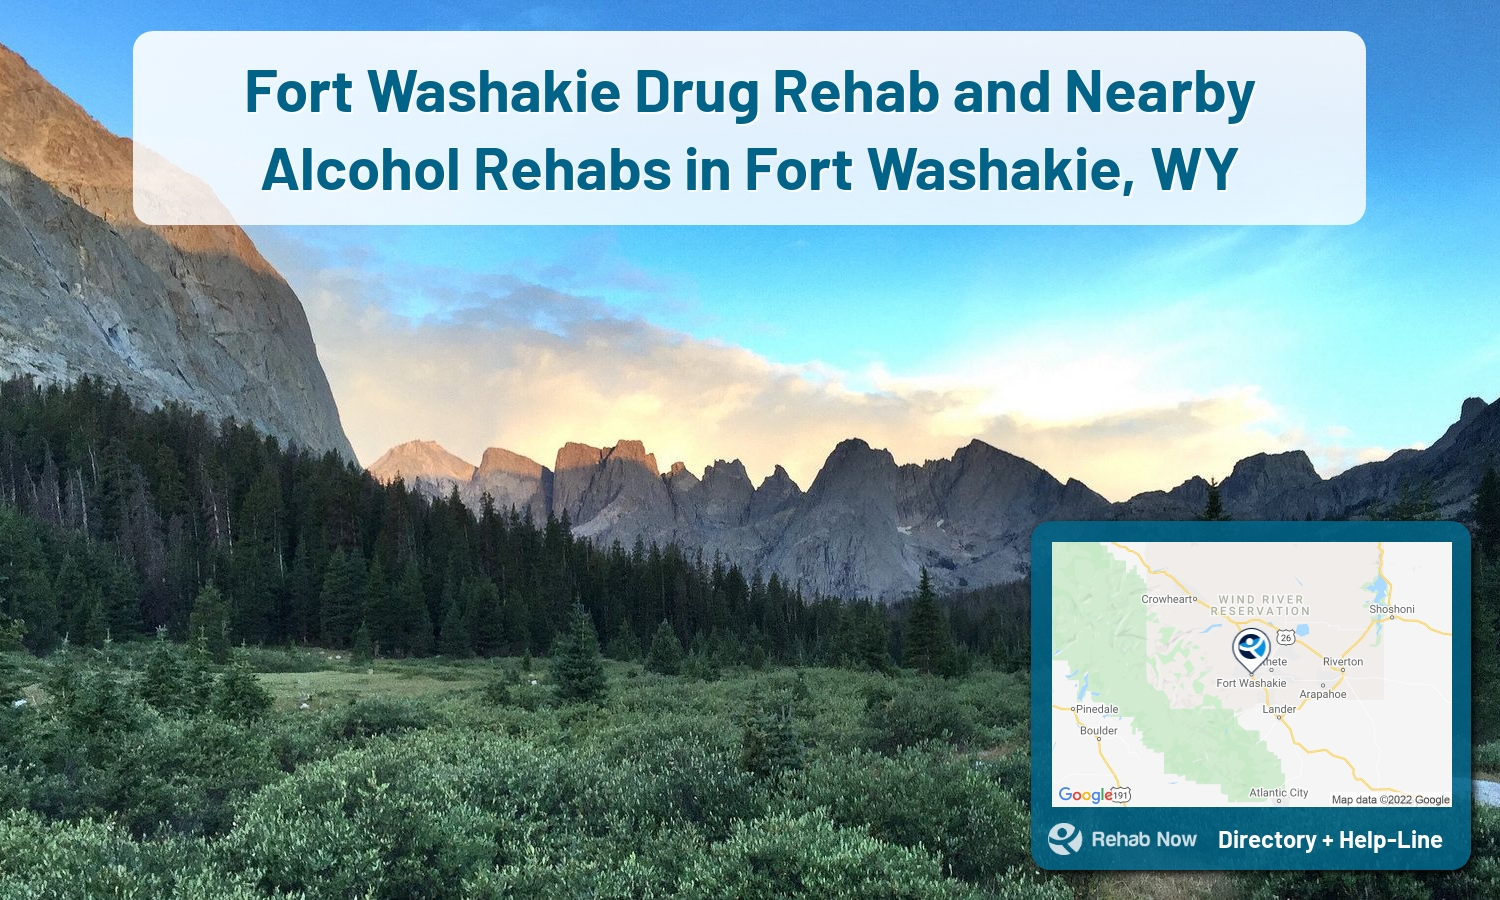 Drug rehab and alcohol treatment services nearby Fort Washakie, WY. Need help choosing a treatment program? Call our free hotline!